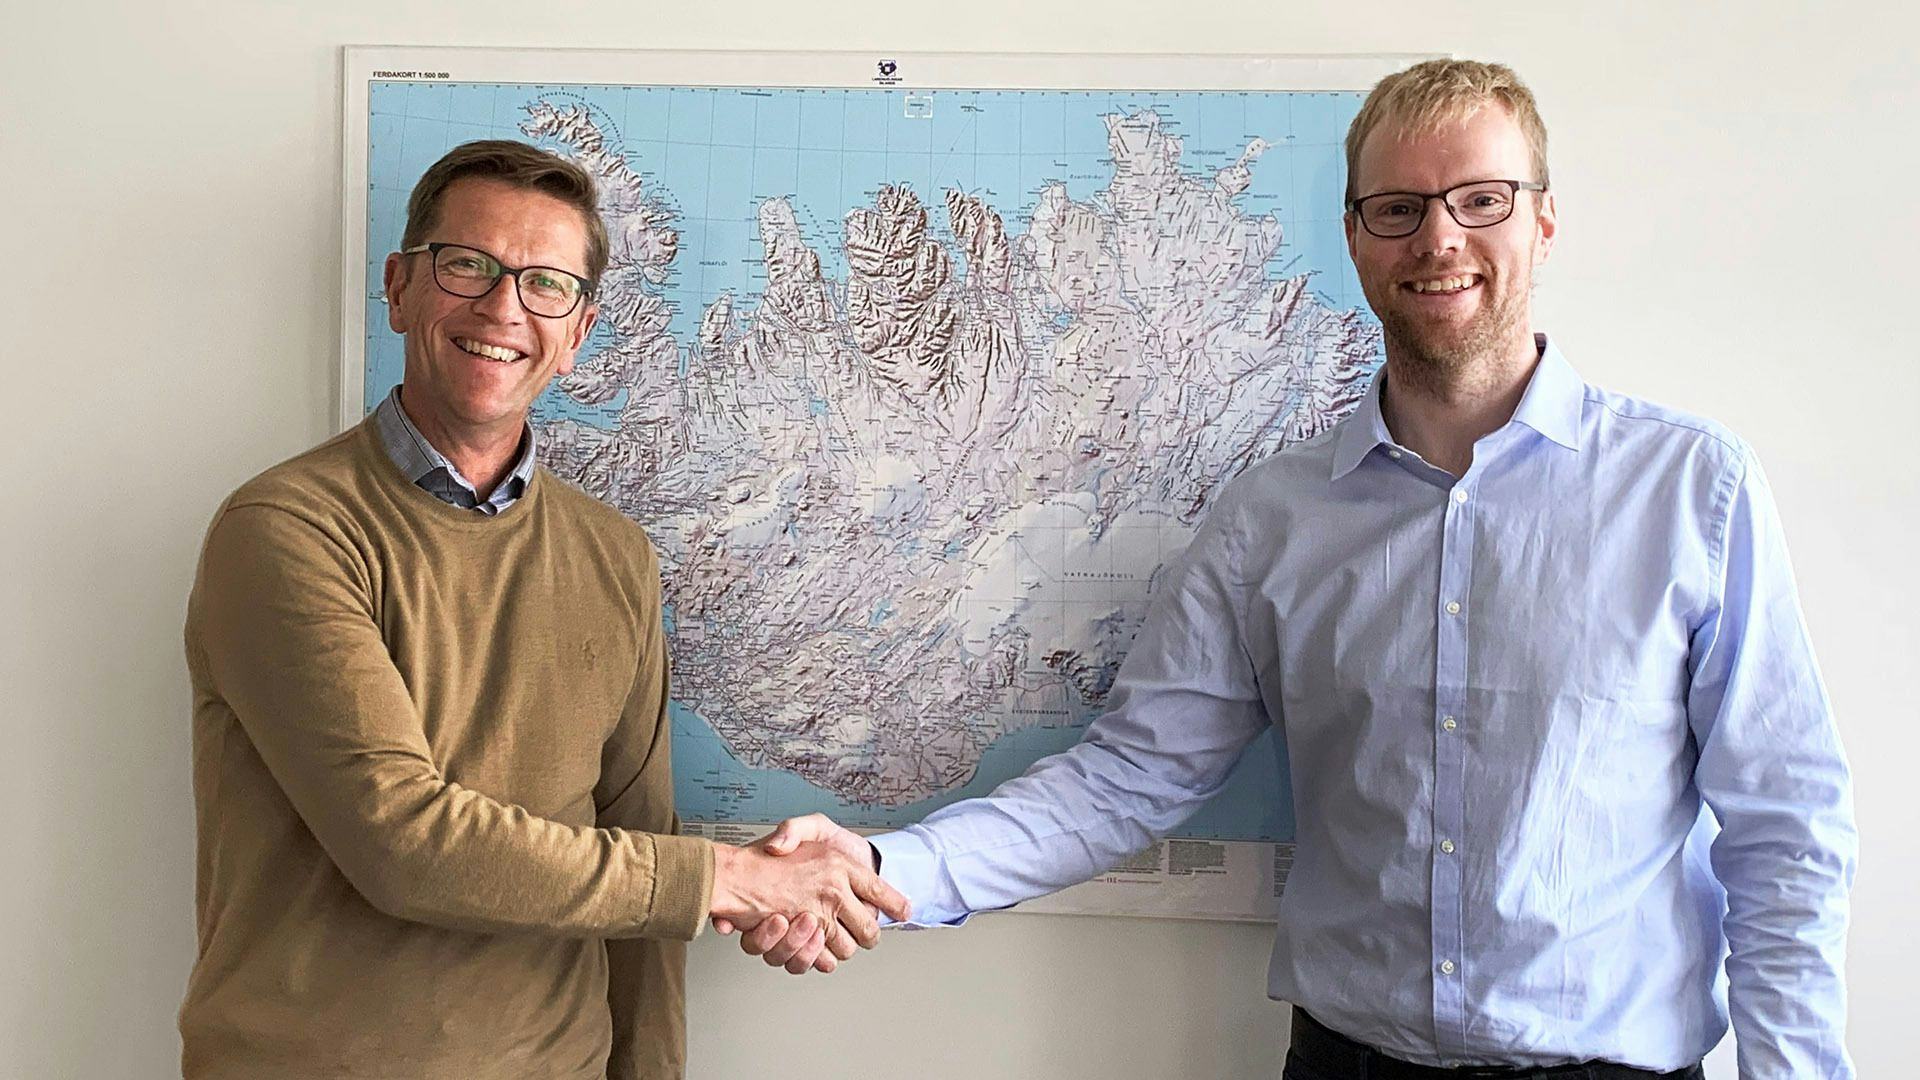 Two smiling men shaking hands in front of a large wall map